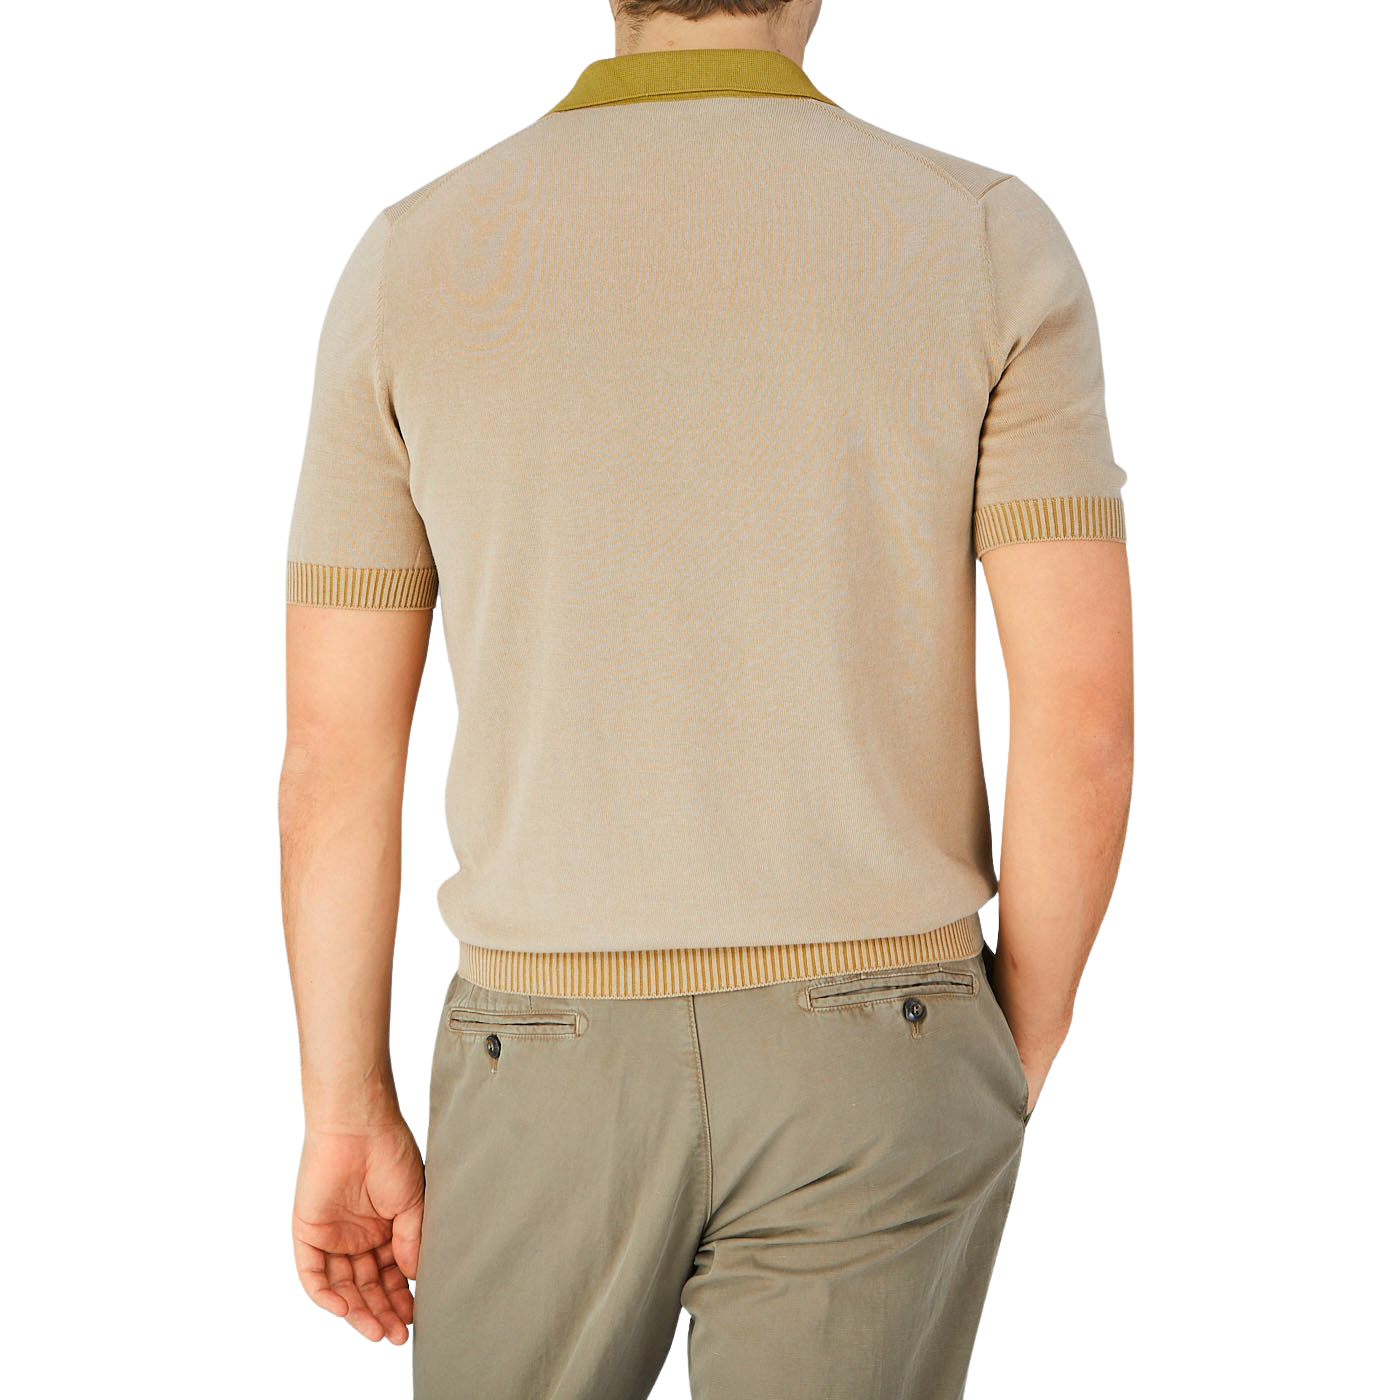 The back view of a man wearing a Gran Sasso Beige Cotton Contrast Collar Polo Shirt and khaki pants.